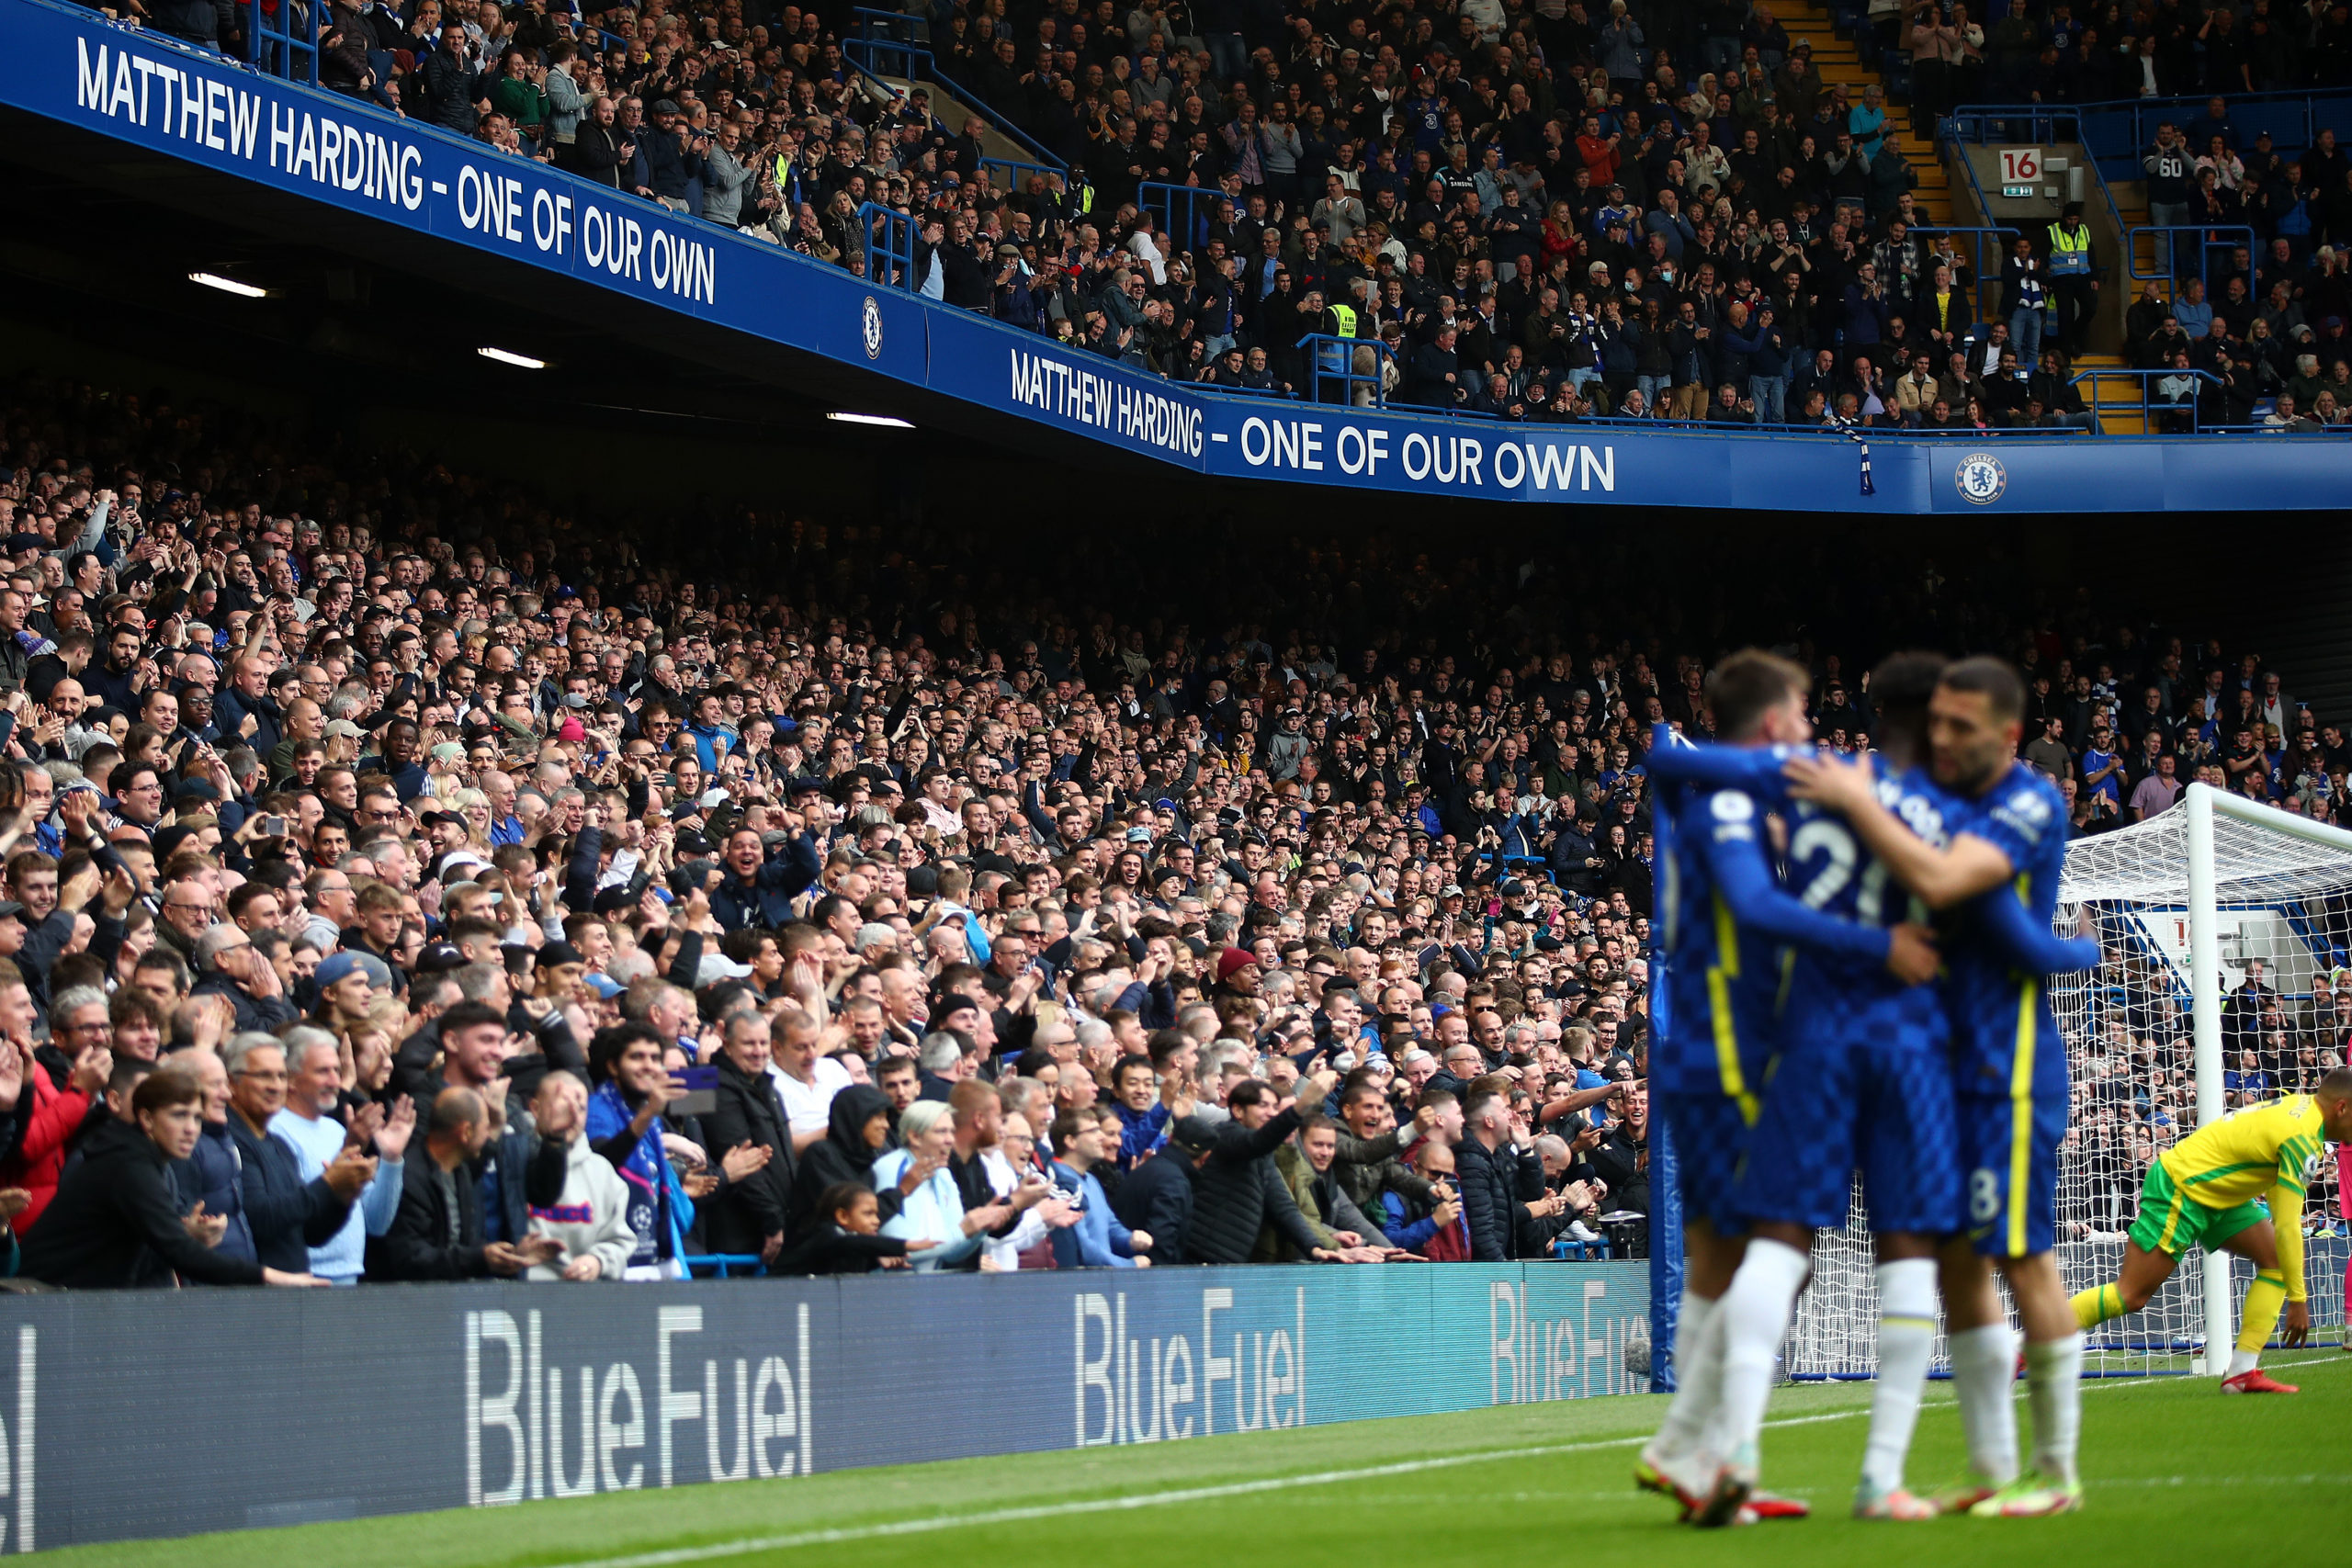 ‘This is disgraceful’: Some Chelsea fans react to ’ridiculous’ club news they’re hearing